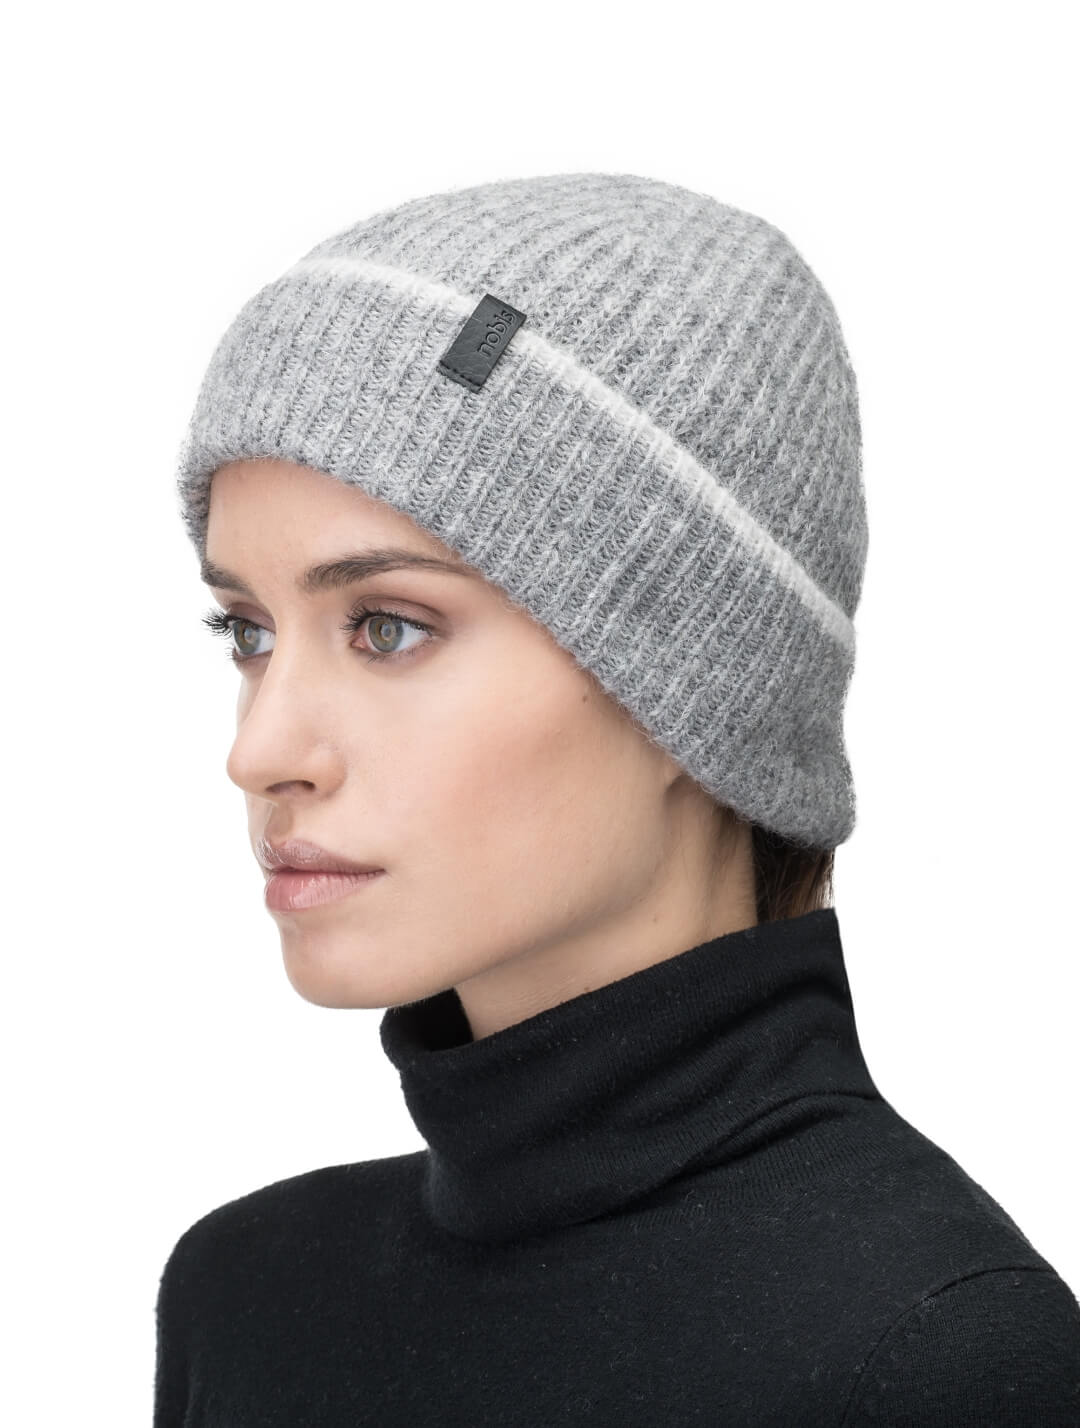 Dain Unisex Knit Watch Cap in superfine alpaca and merino wool, contrast colour knit along cuff, and Nobis embossed leather label at the cuff, in Grey Melange